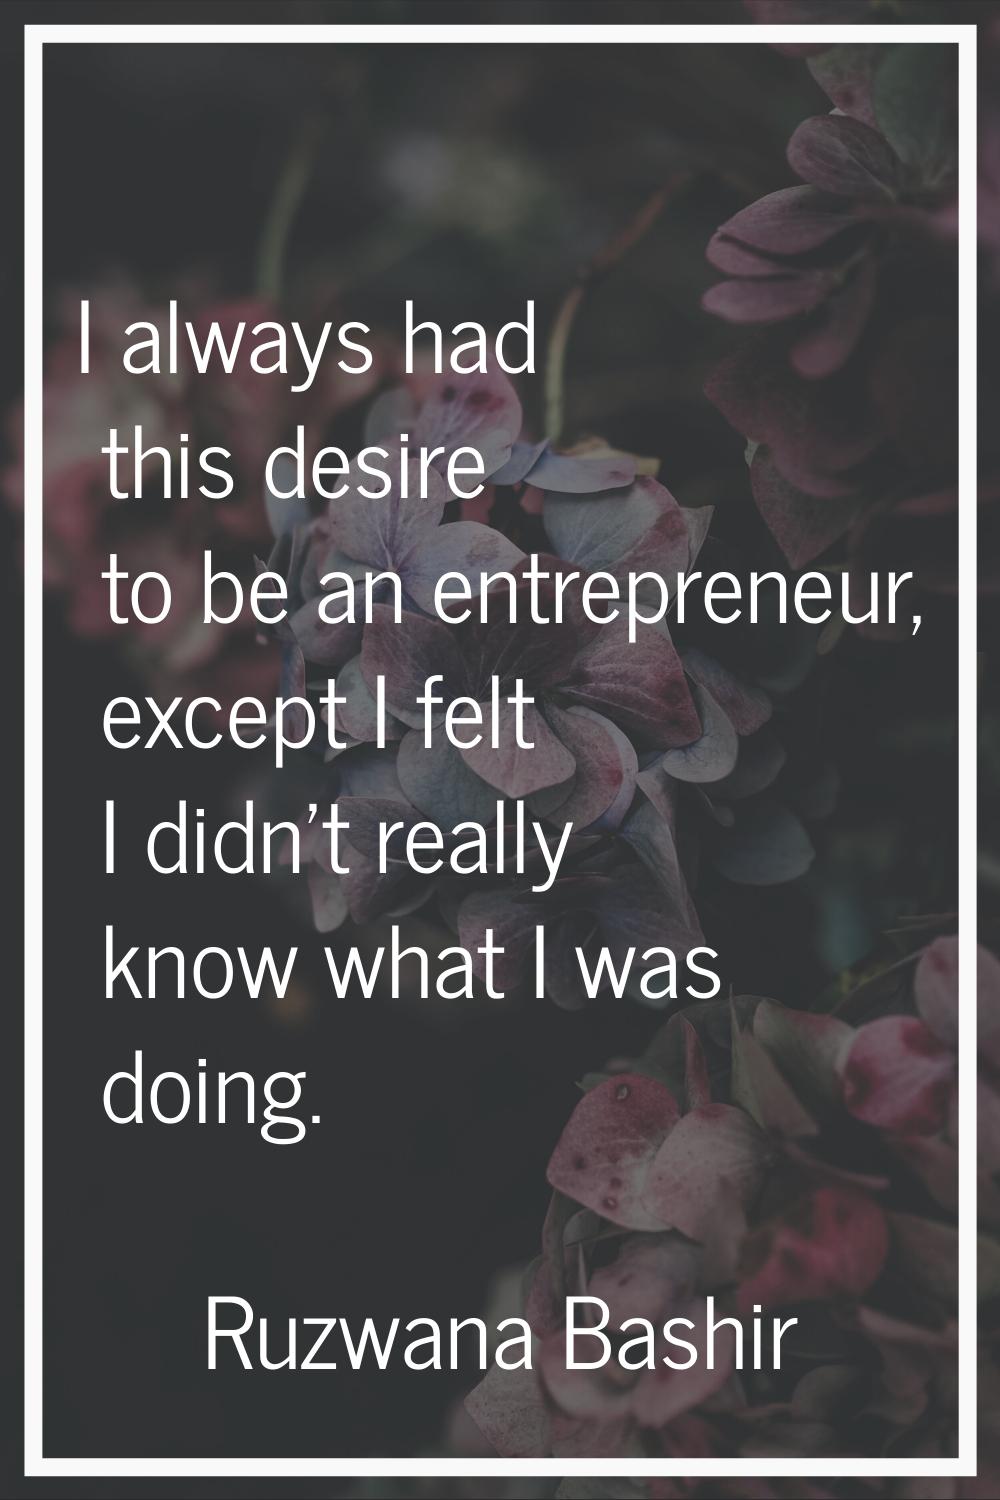 I always had this desire to be an entrepreneur, except I felt I didn't really know what I was doing